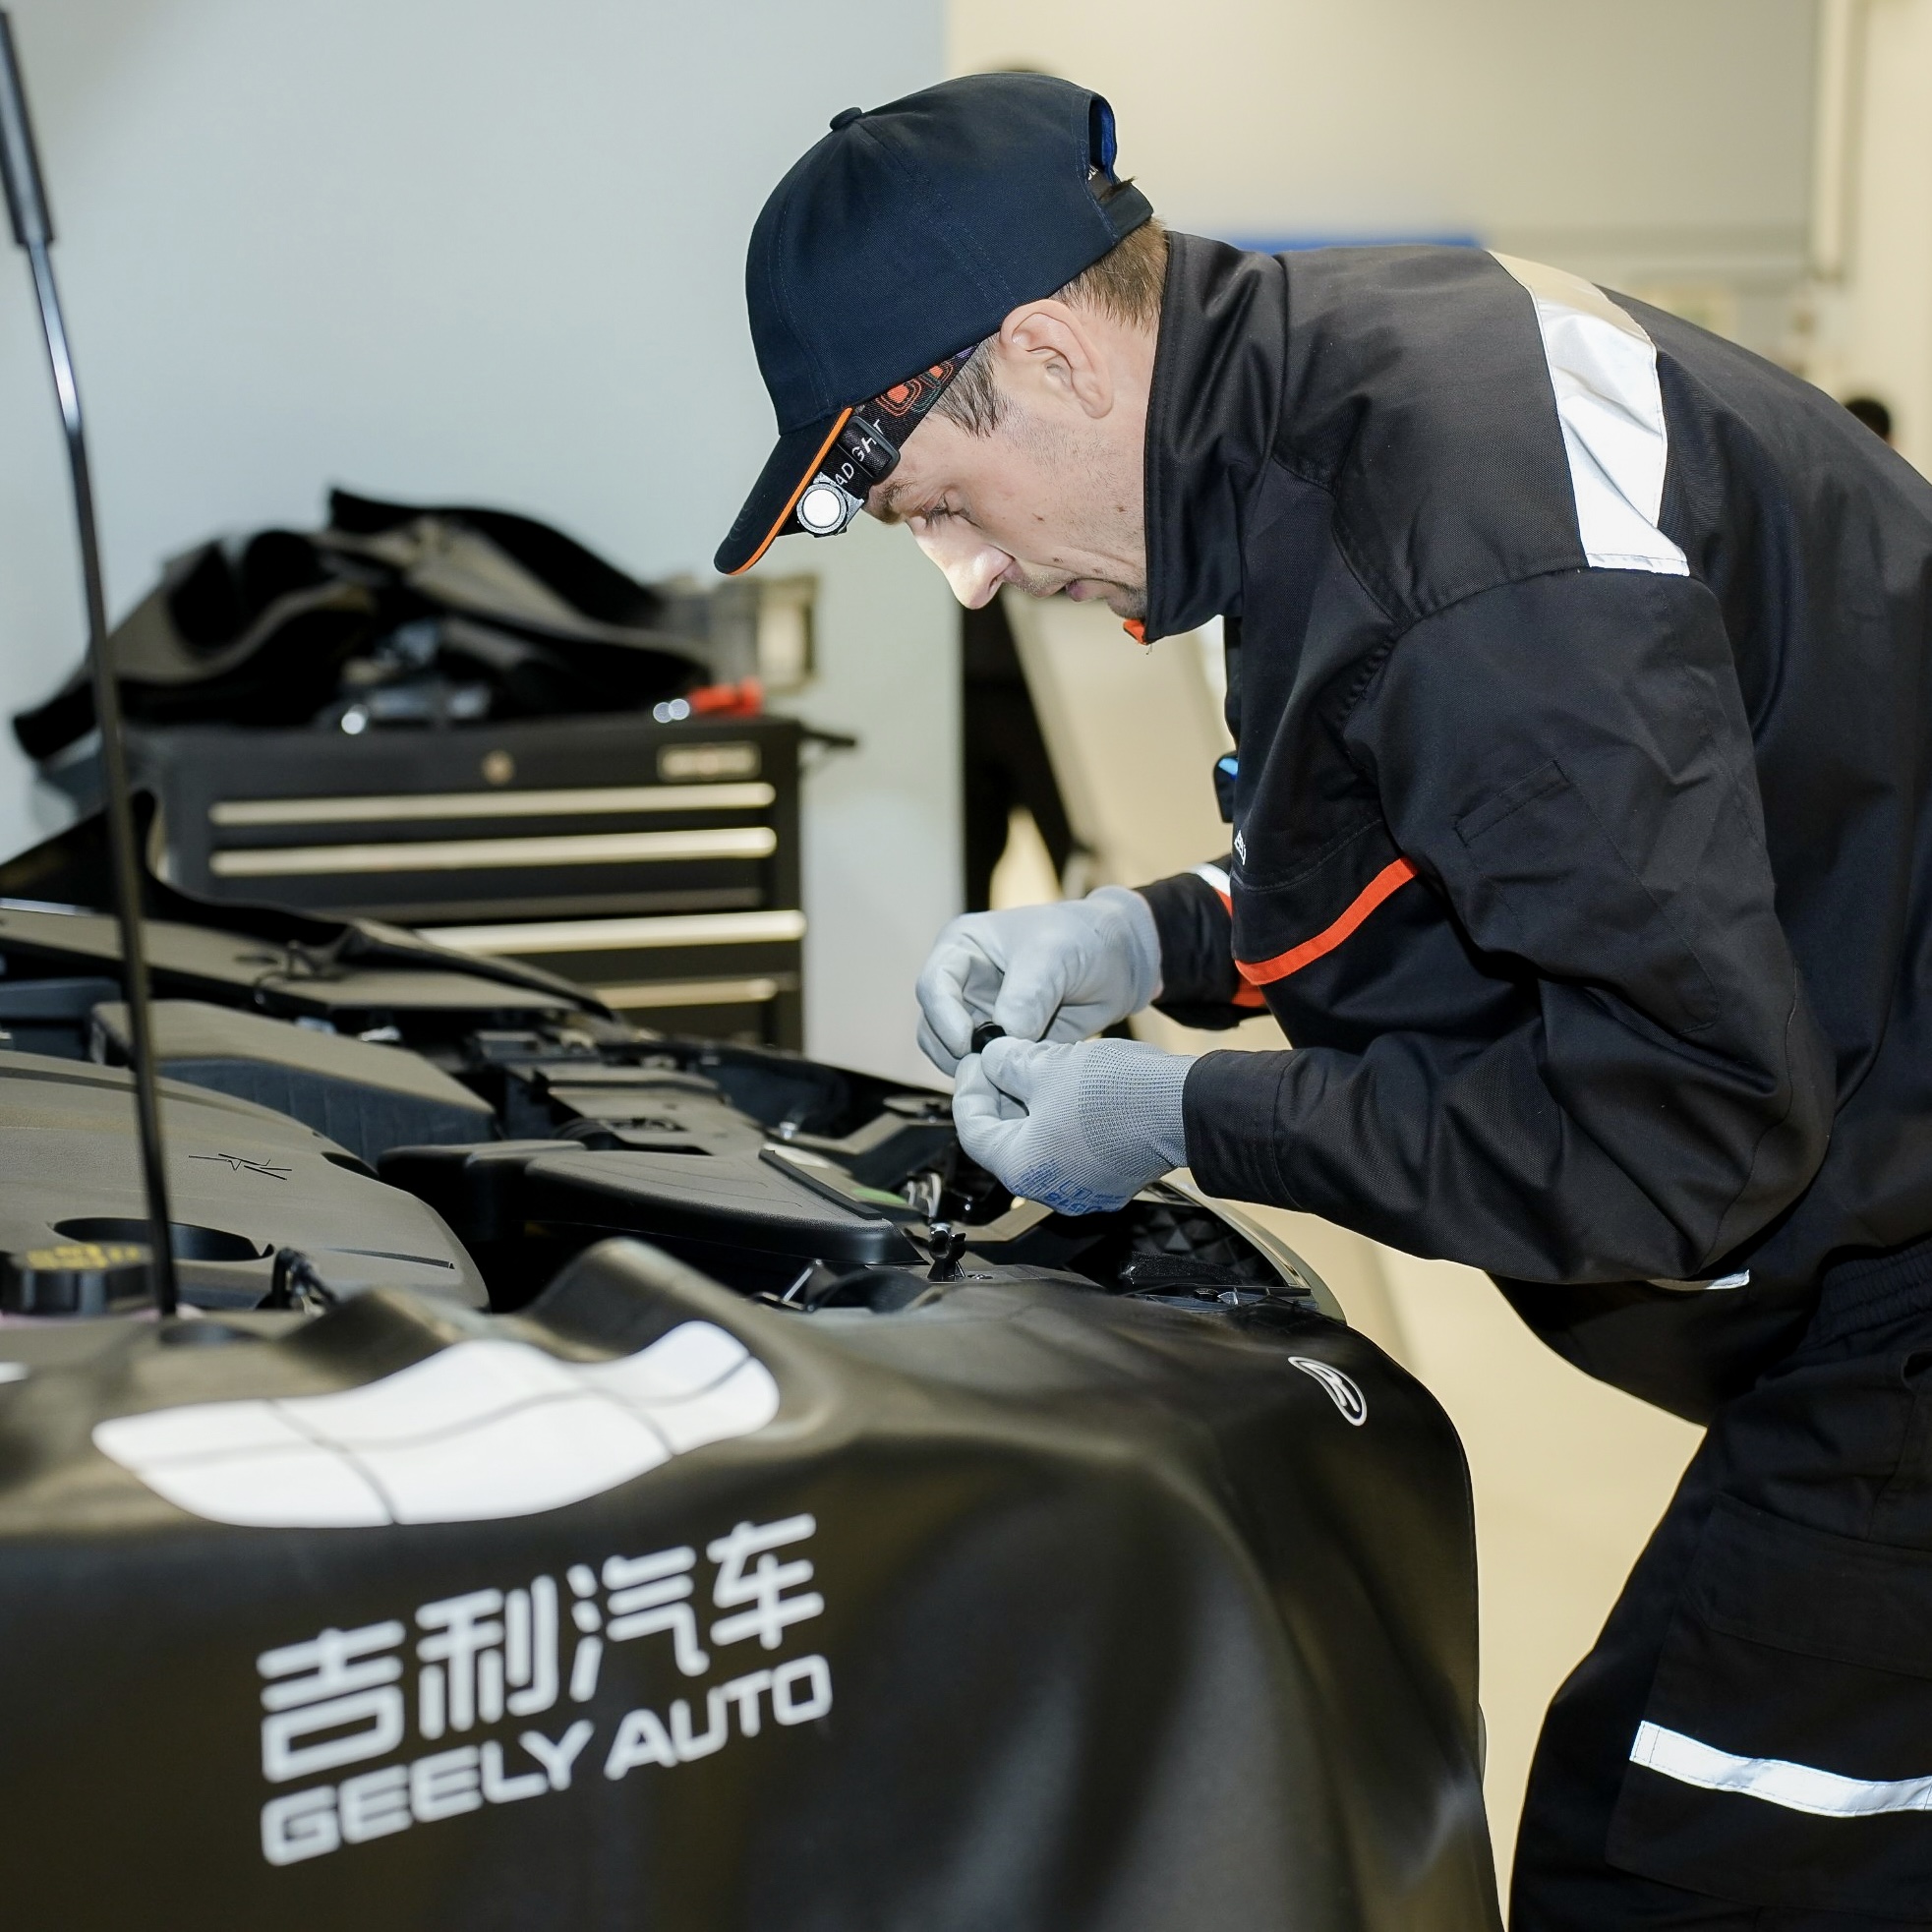 Geely Global Service Skills Competition Participant Detail Engine